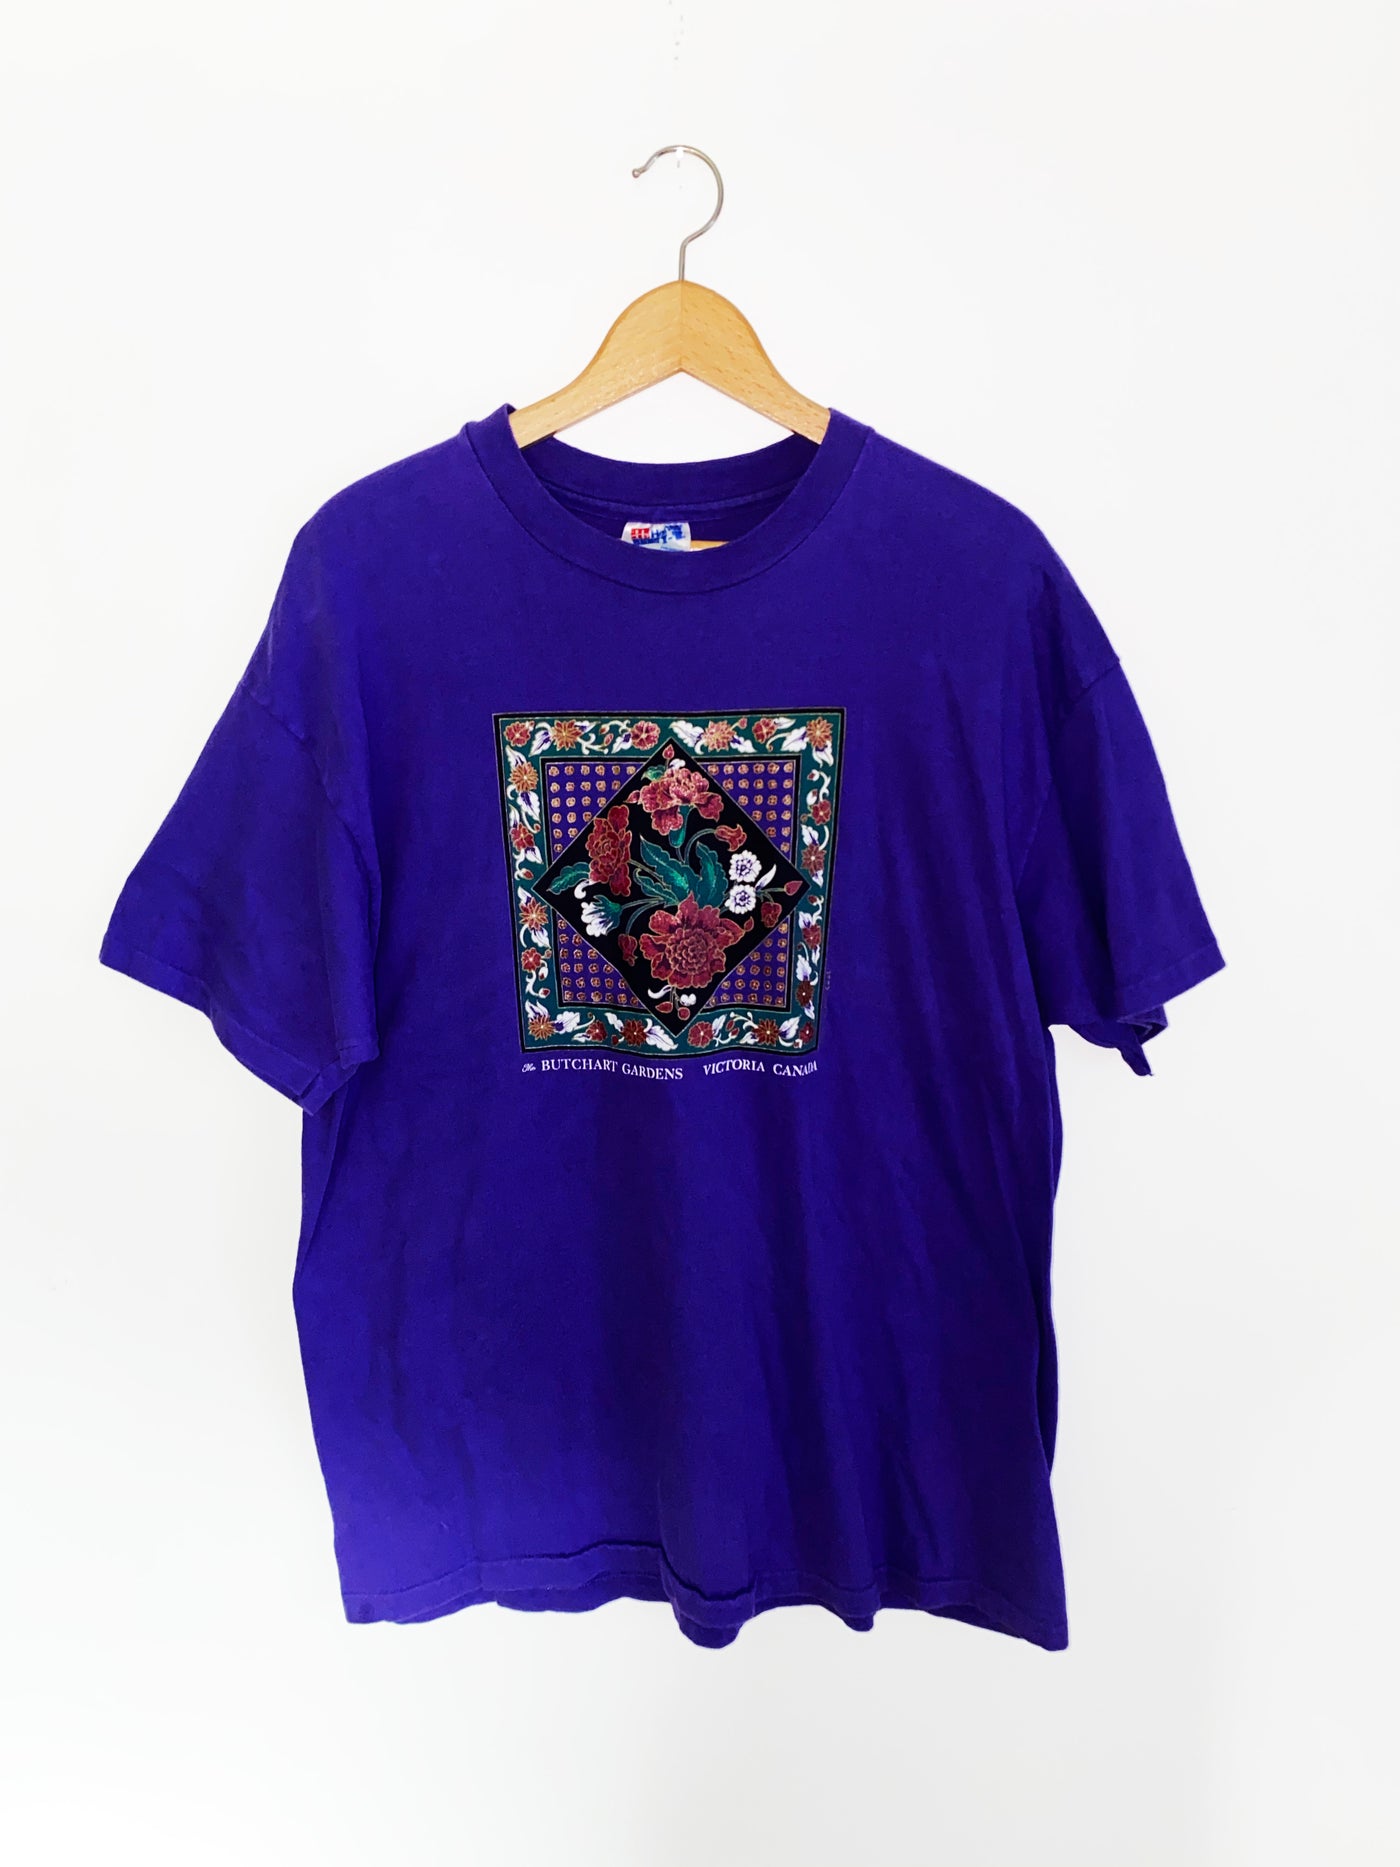 Vintage 90's Butchart Gardens of Canada T-Shirt